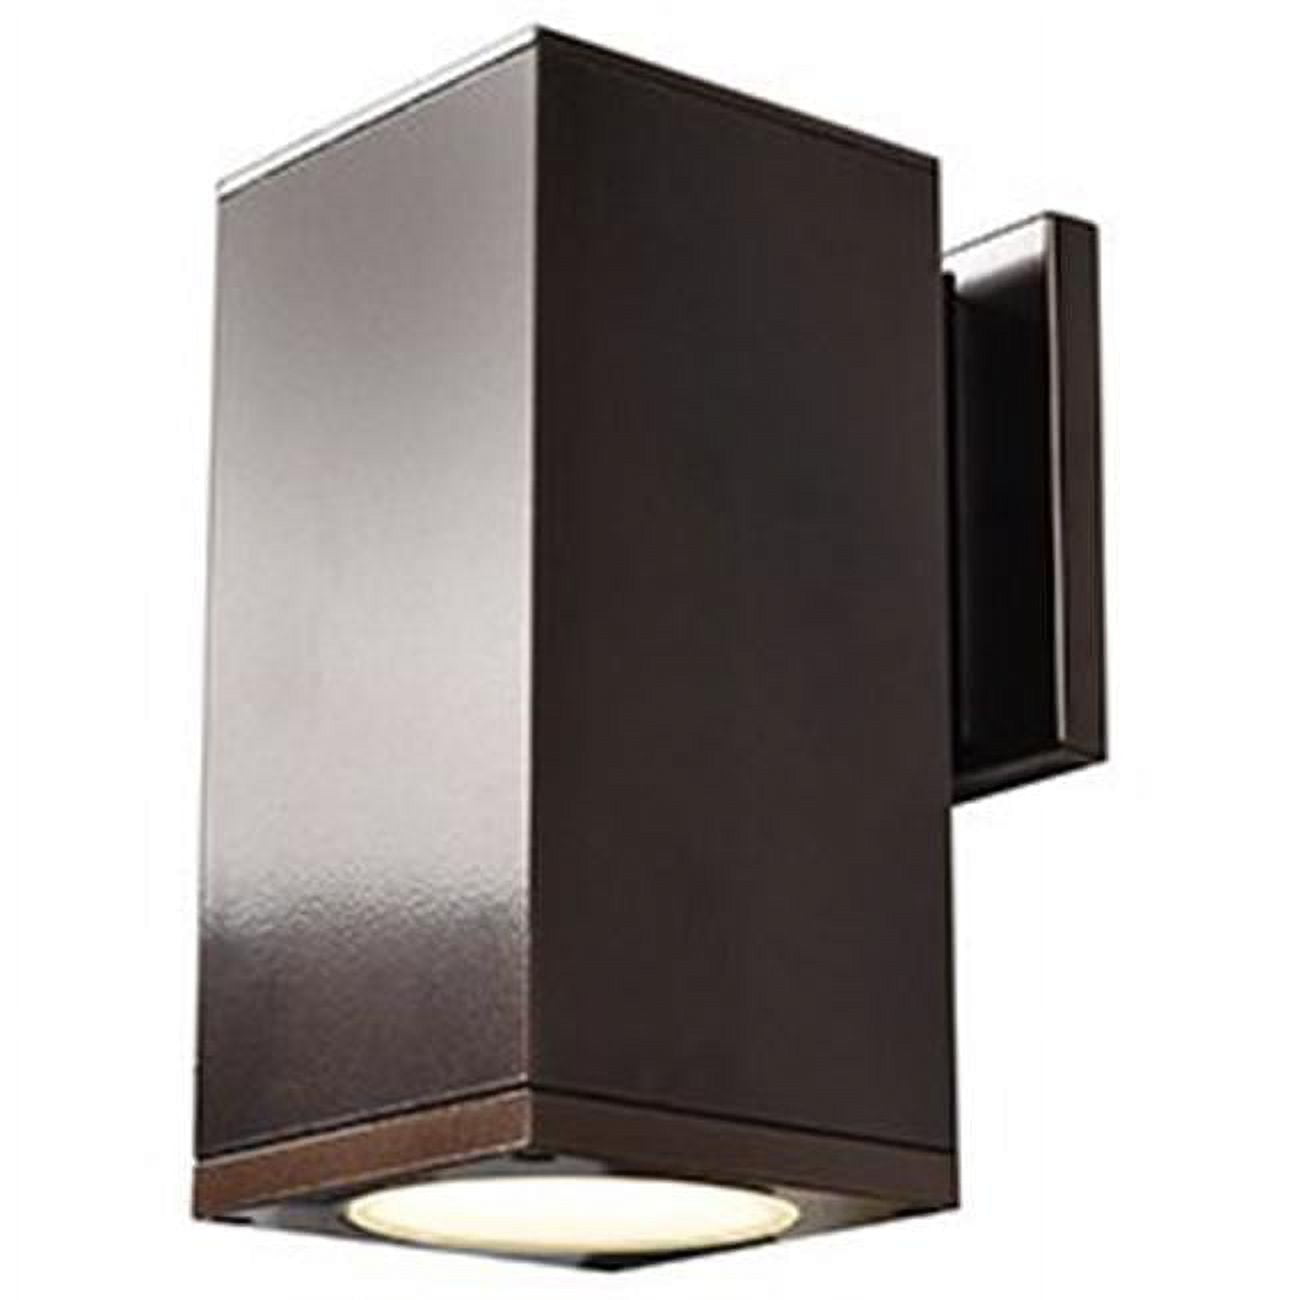 20032ledmg-sat-fst 4.5 X 8 X 5.5 In. Bayside Outdoor Square Cylinder Wall Fixture, Satin